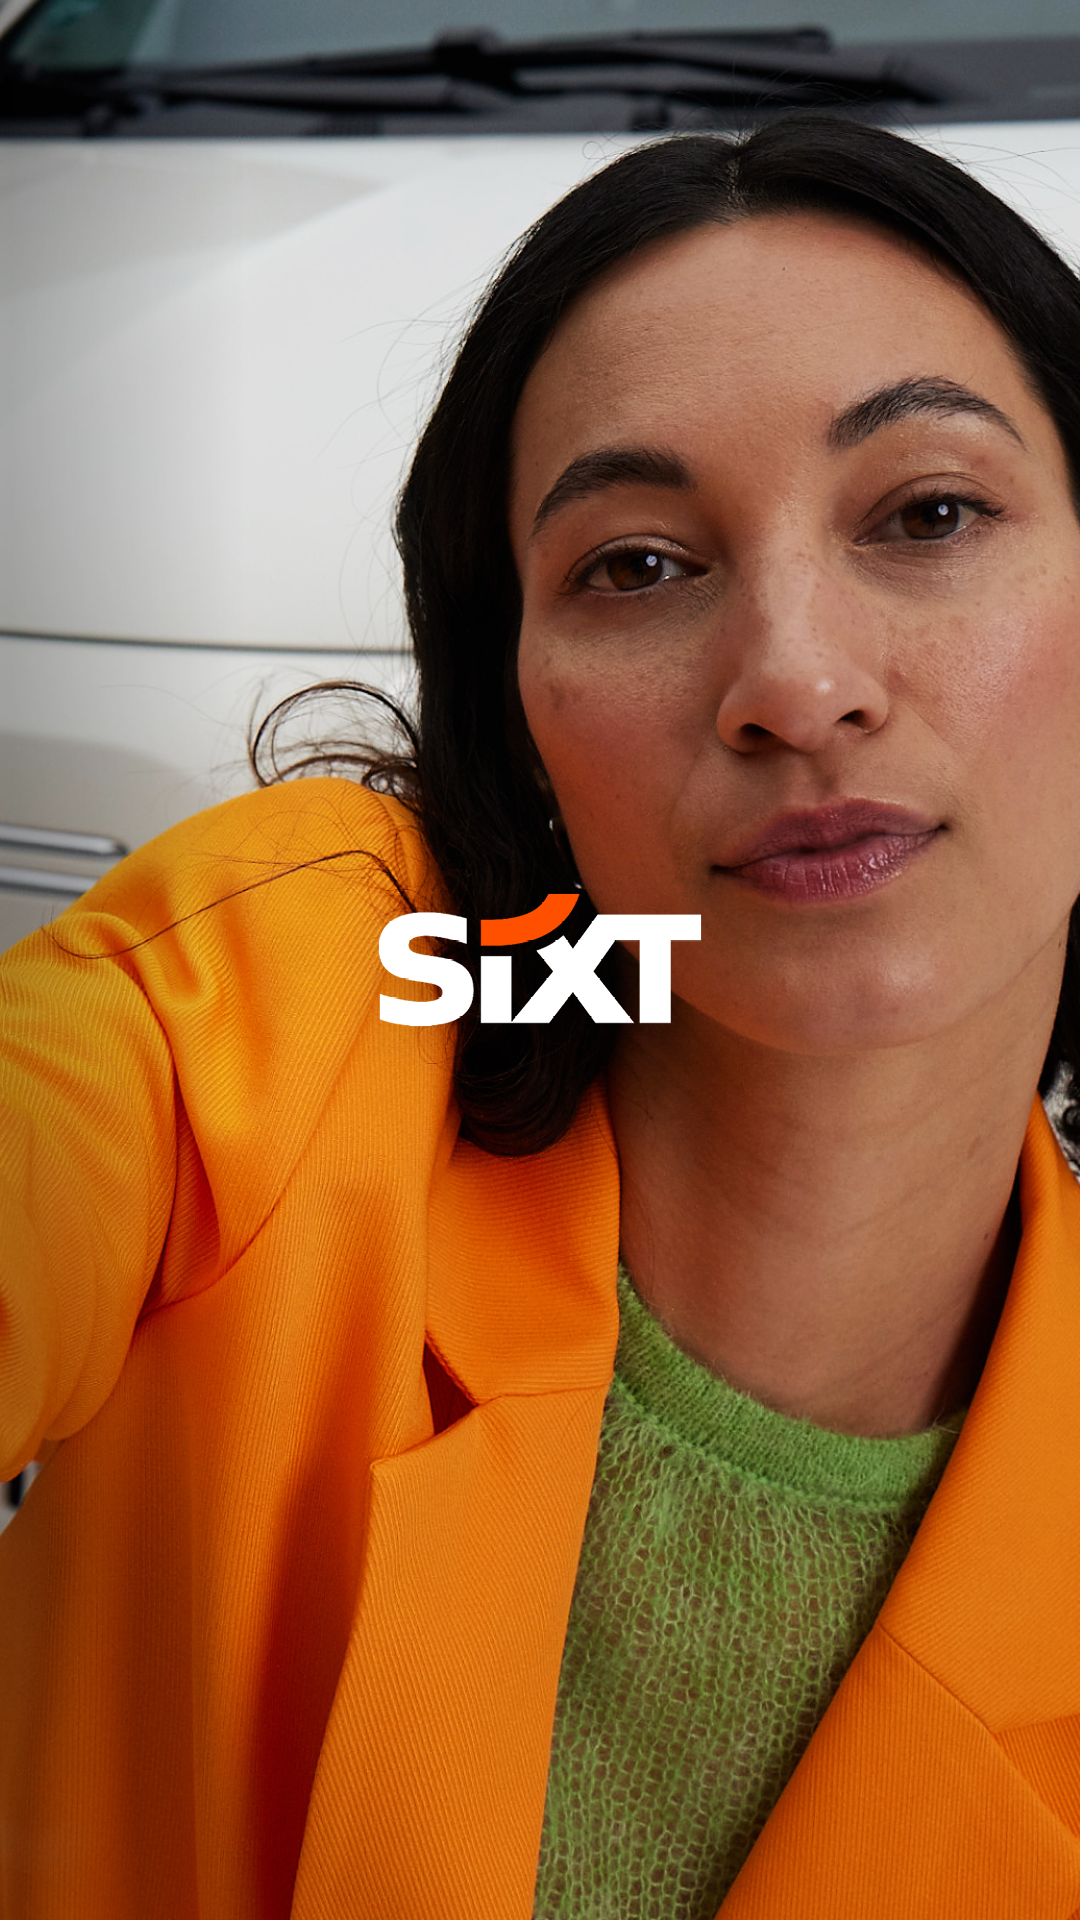 SIXT ad in new brand design by Jung von Matt BRAND IDENTITY: a young women with a blazer jacket in SIXT Orange standing in front of a white FIAT 500 making a selfie with her smartphone, the hand a bit in front of the camera